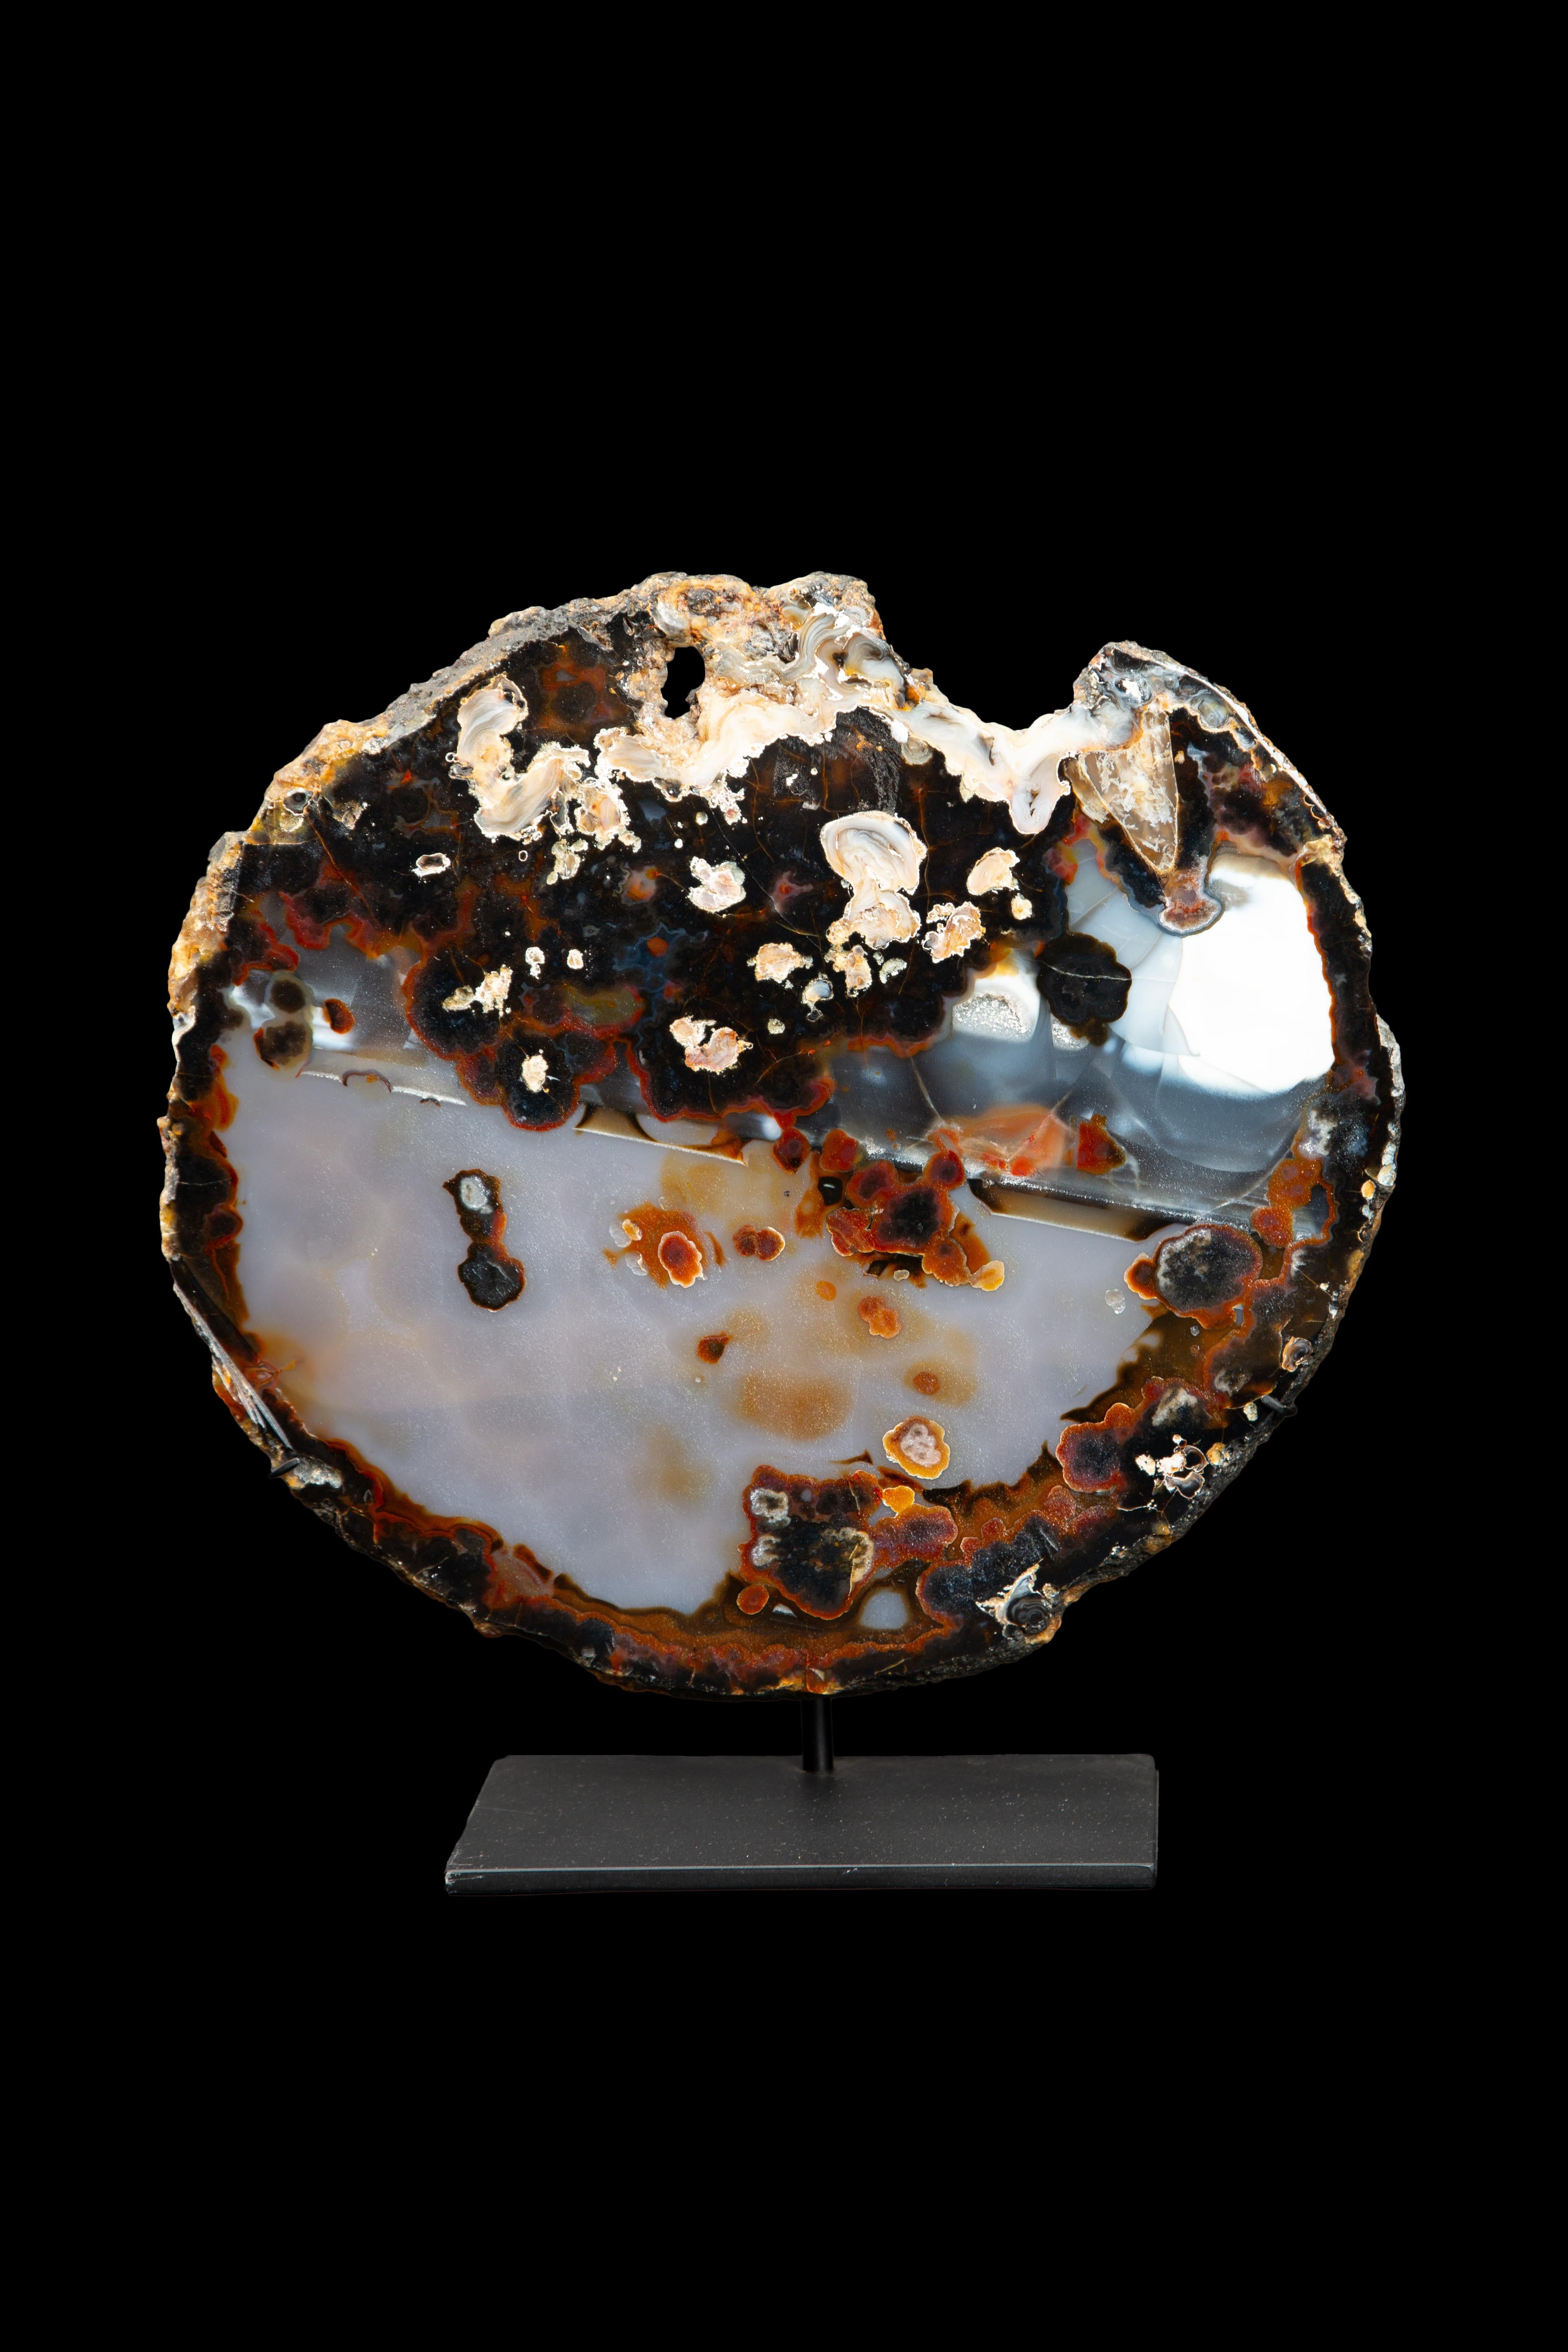 Mounted Agate Slice:

Measures: 12.5